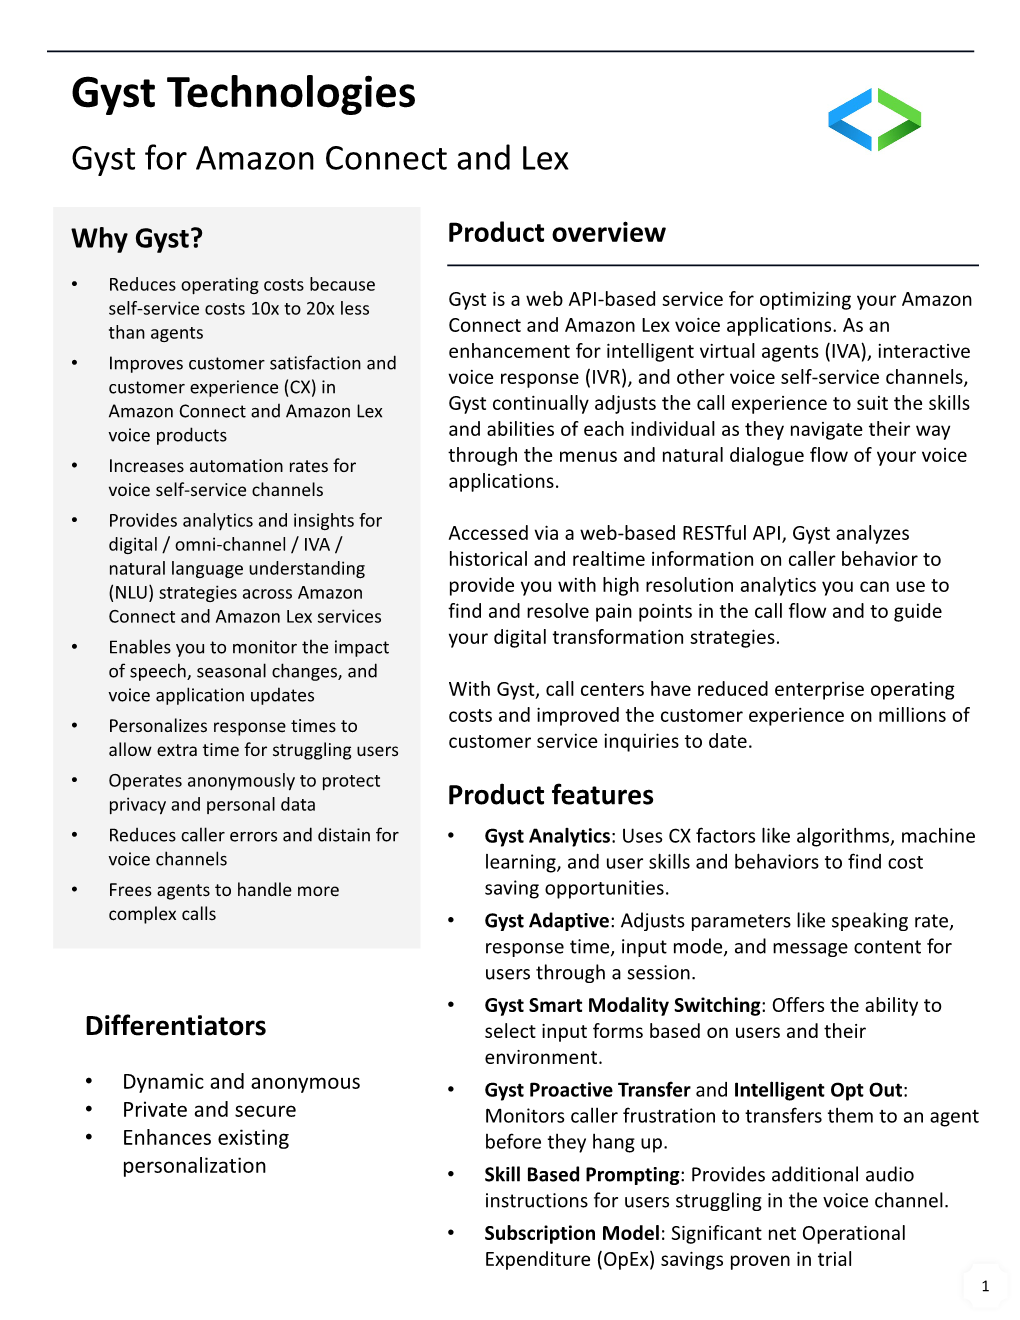 Gyst Technologies Gyst for Amazon Connect and Lex